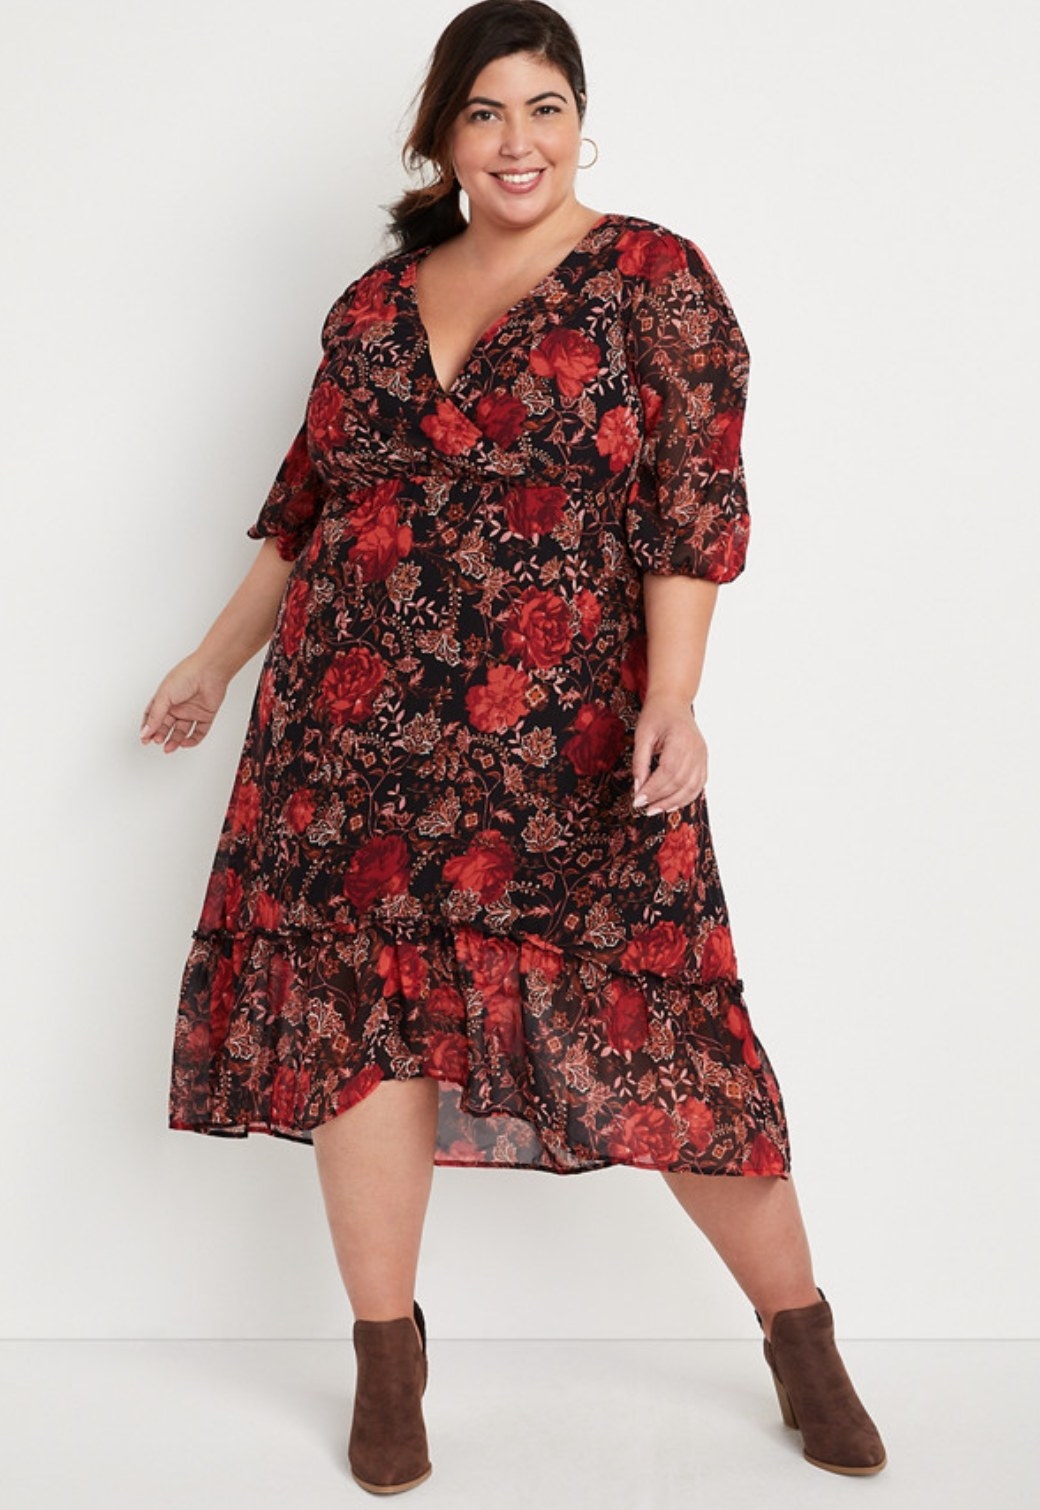 model wearing the floral dress with brown ankle booties